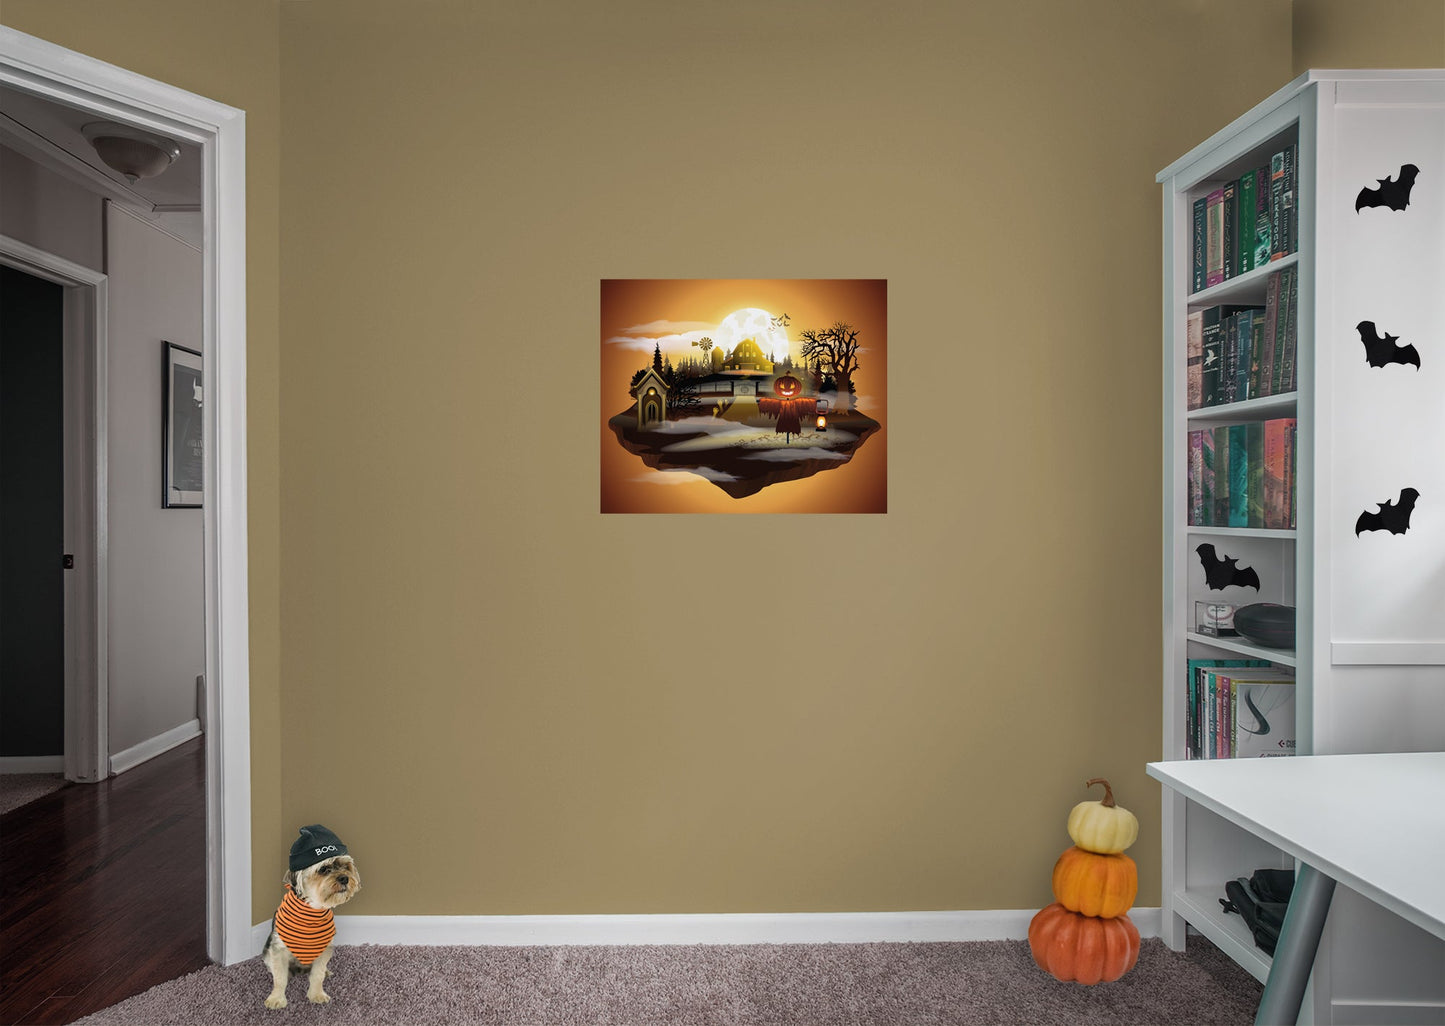 Halloween:  Floating World Mural        -   Removable Wall   Adhesive Decal